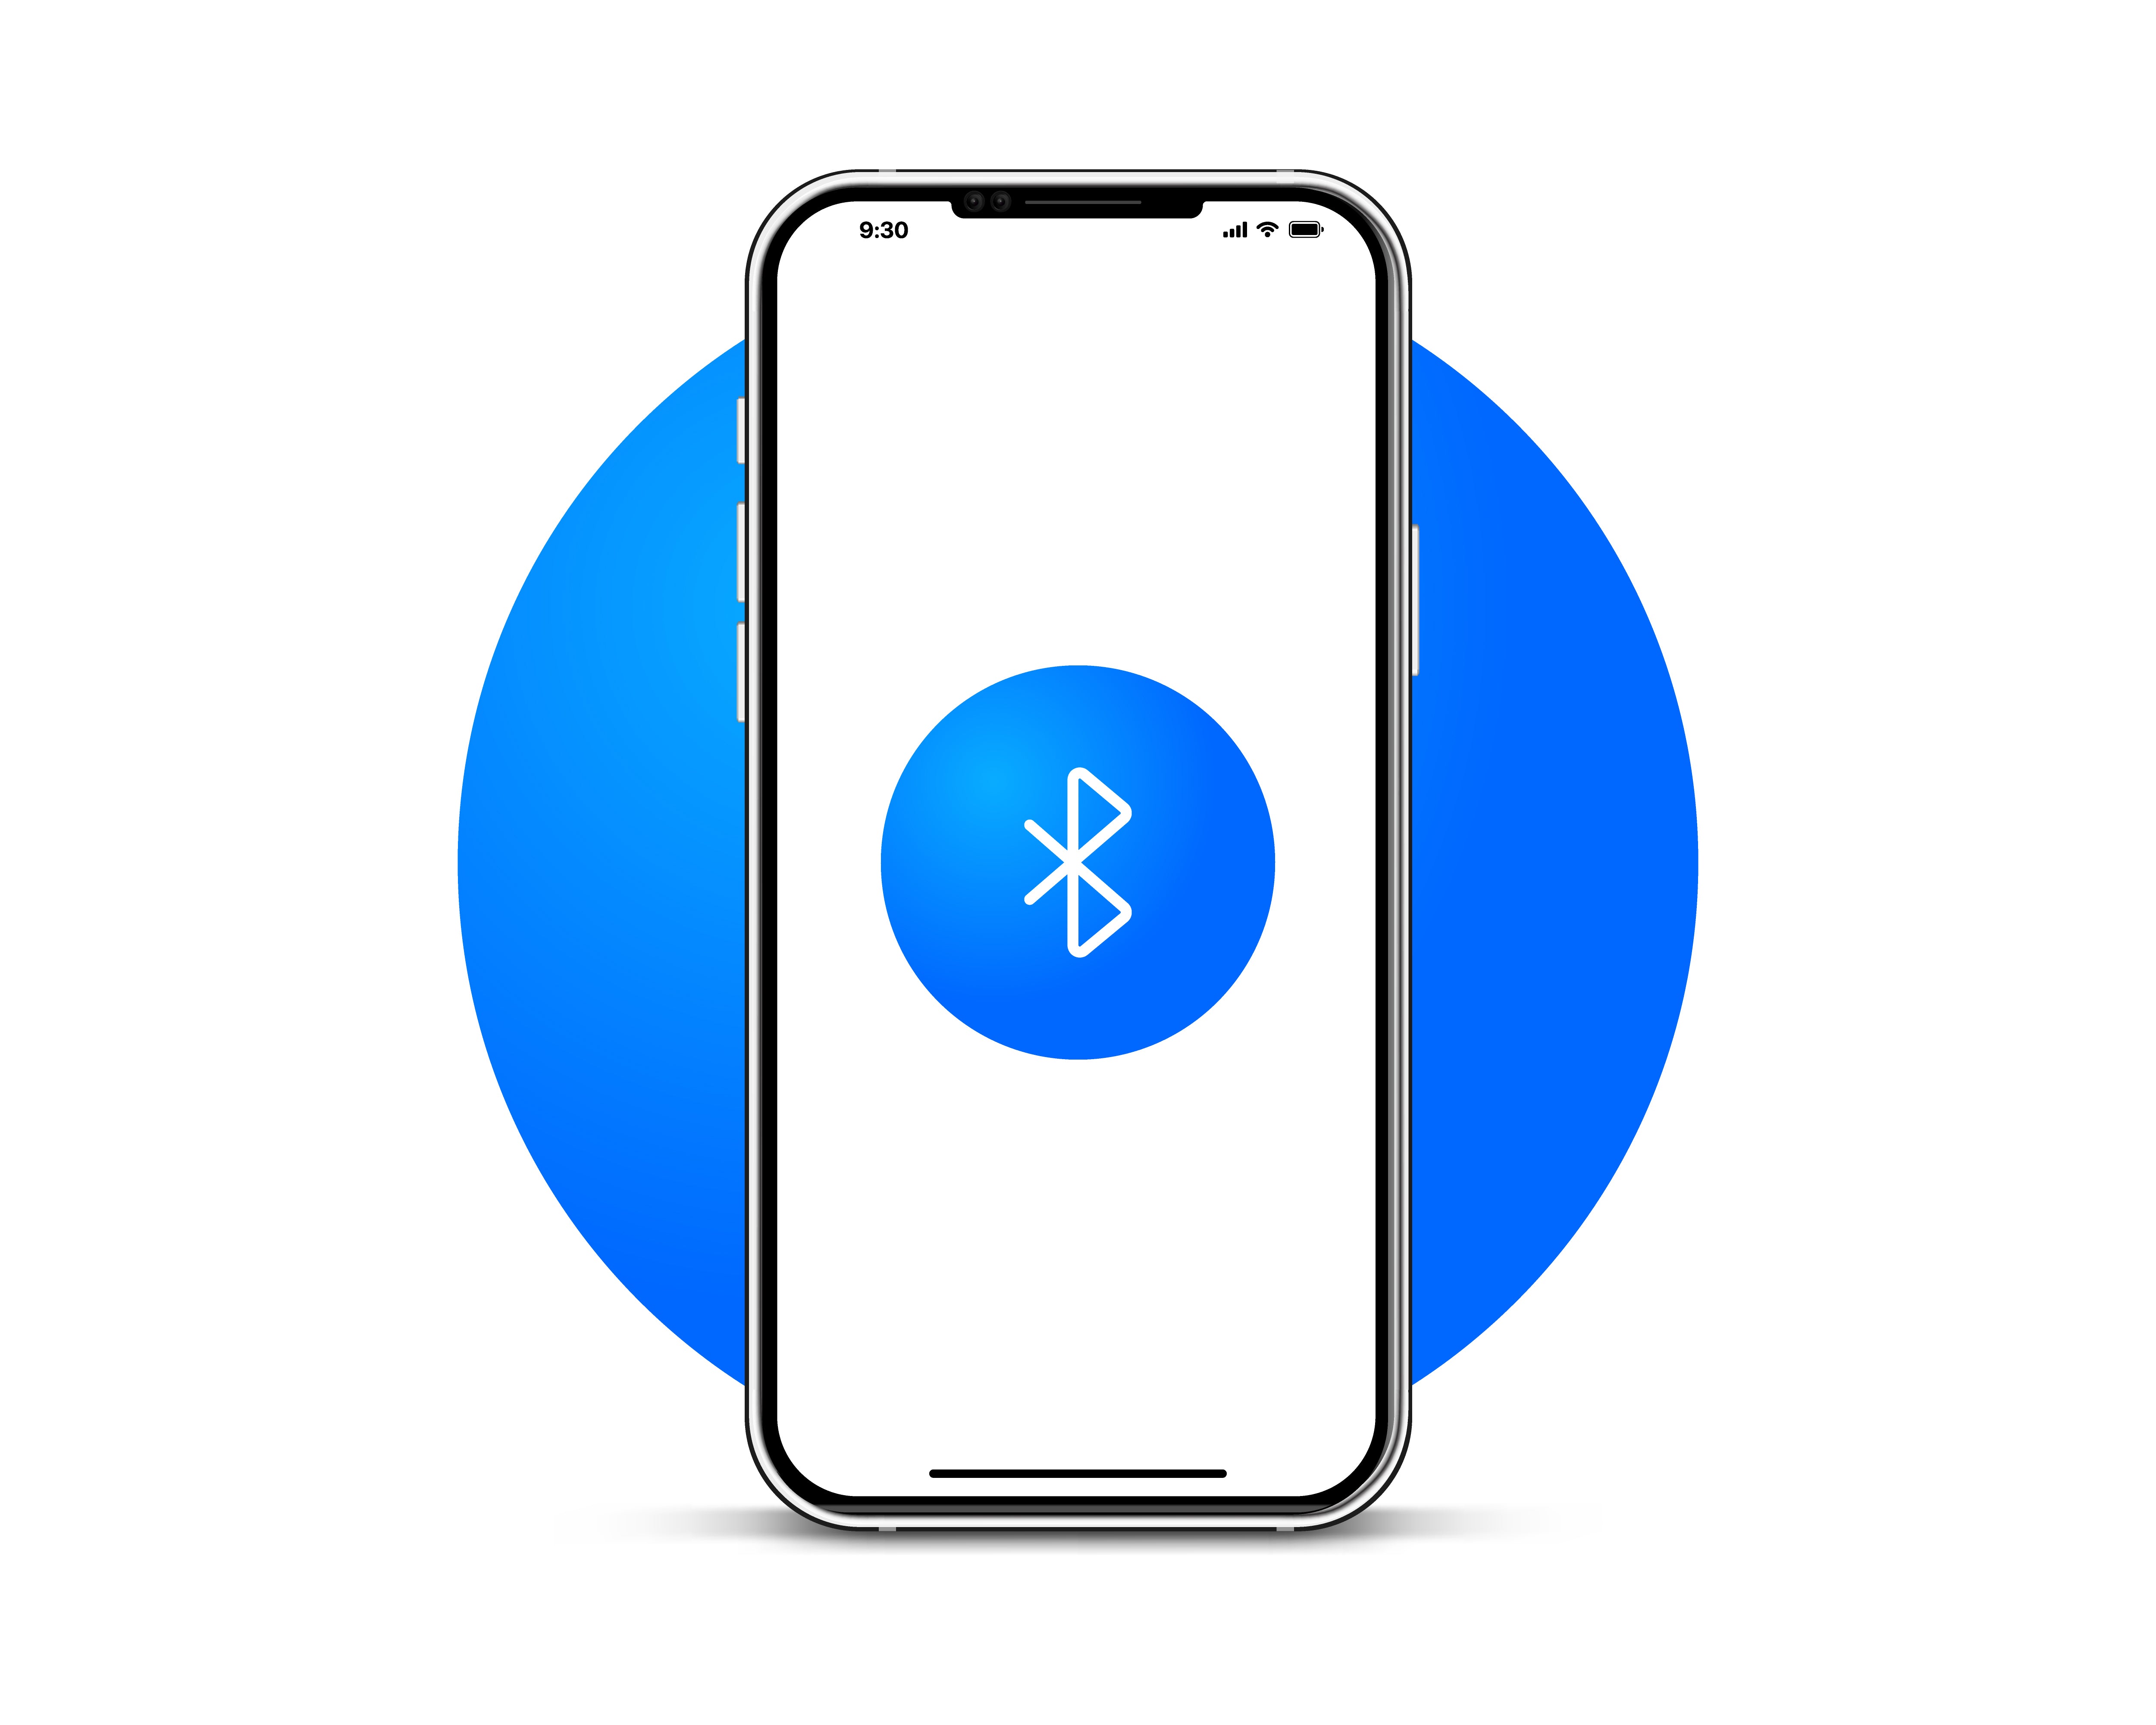 a blue bluetooth icon centered on a white mobile phone display. the phone is sitting on a blue circular background